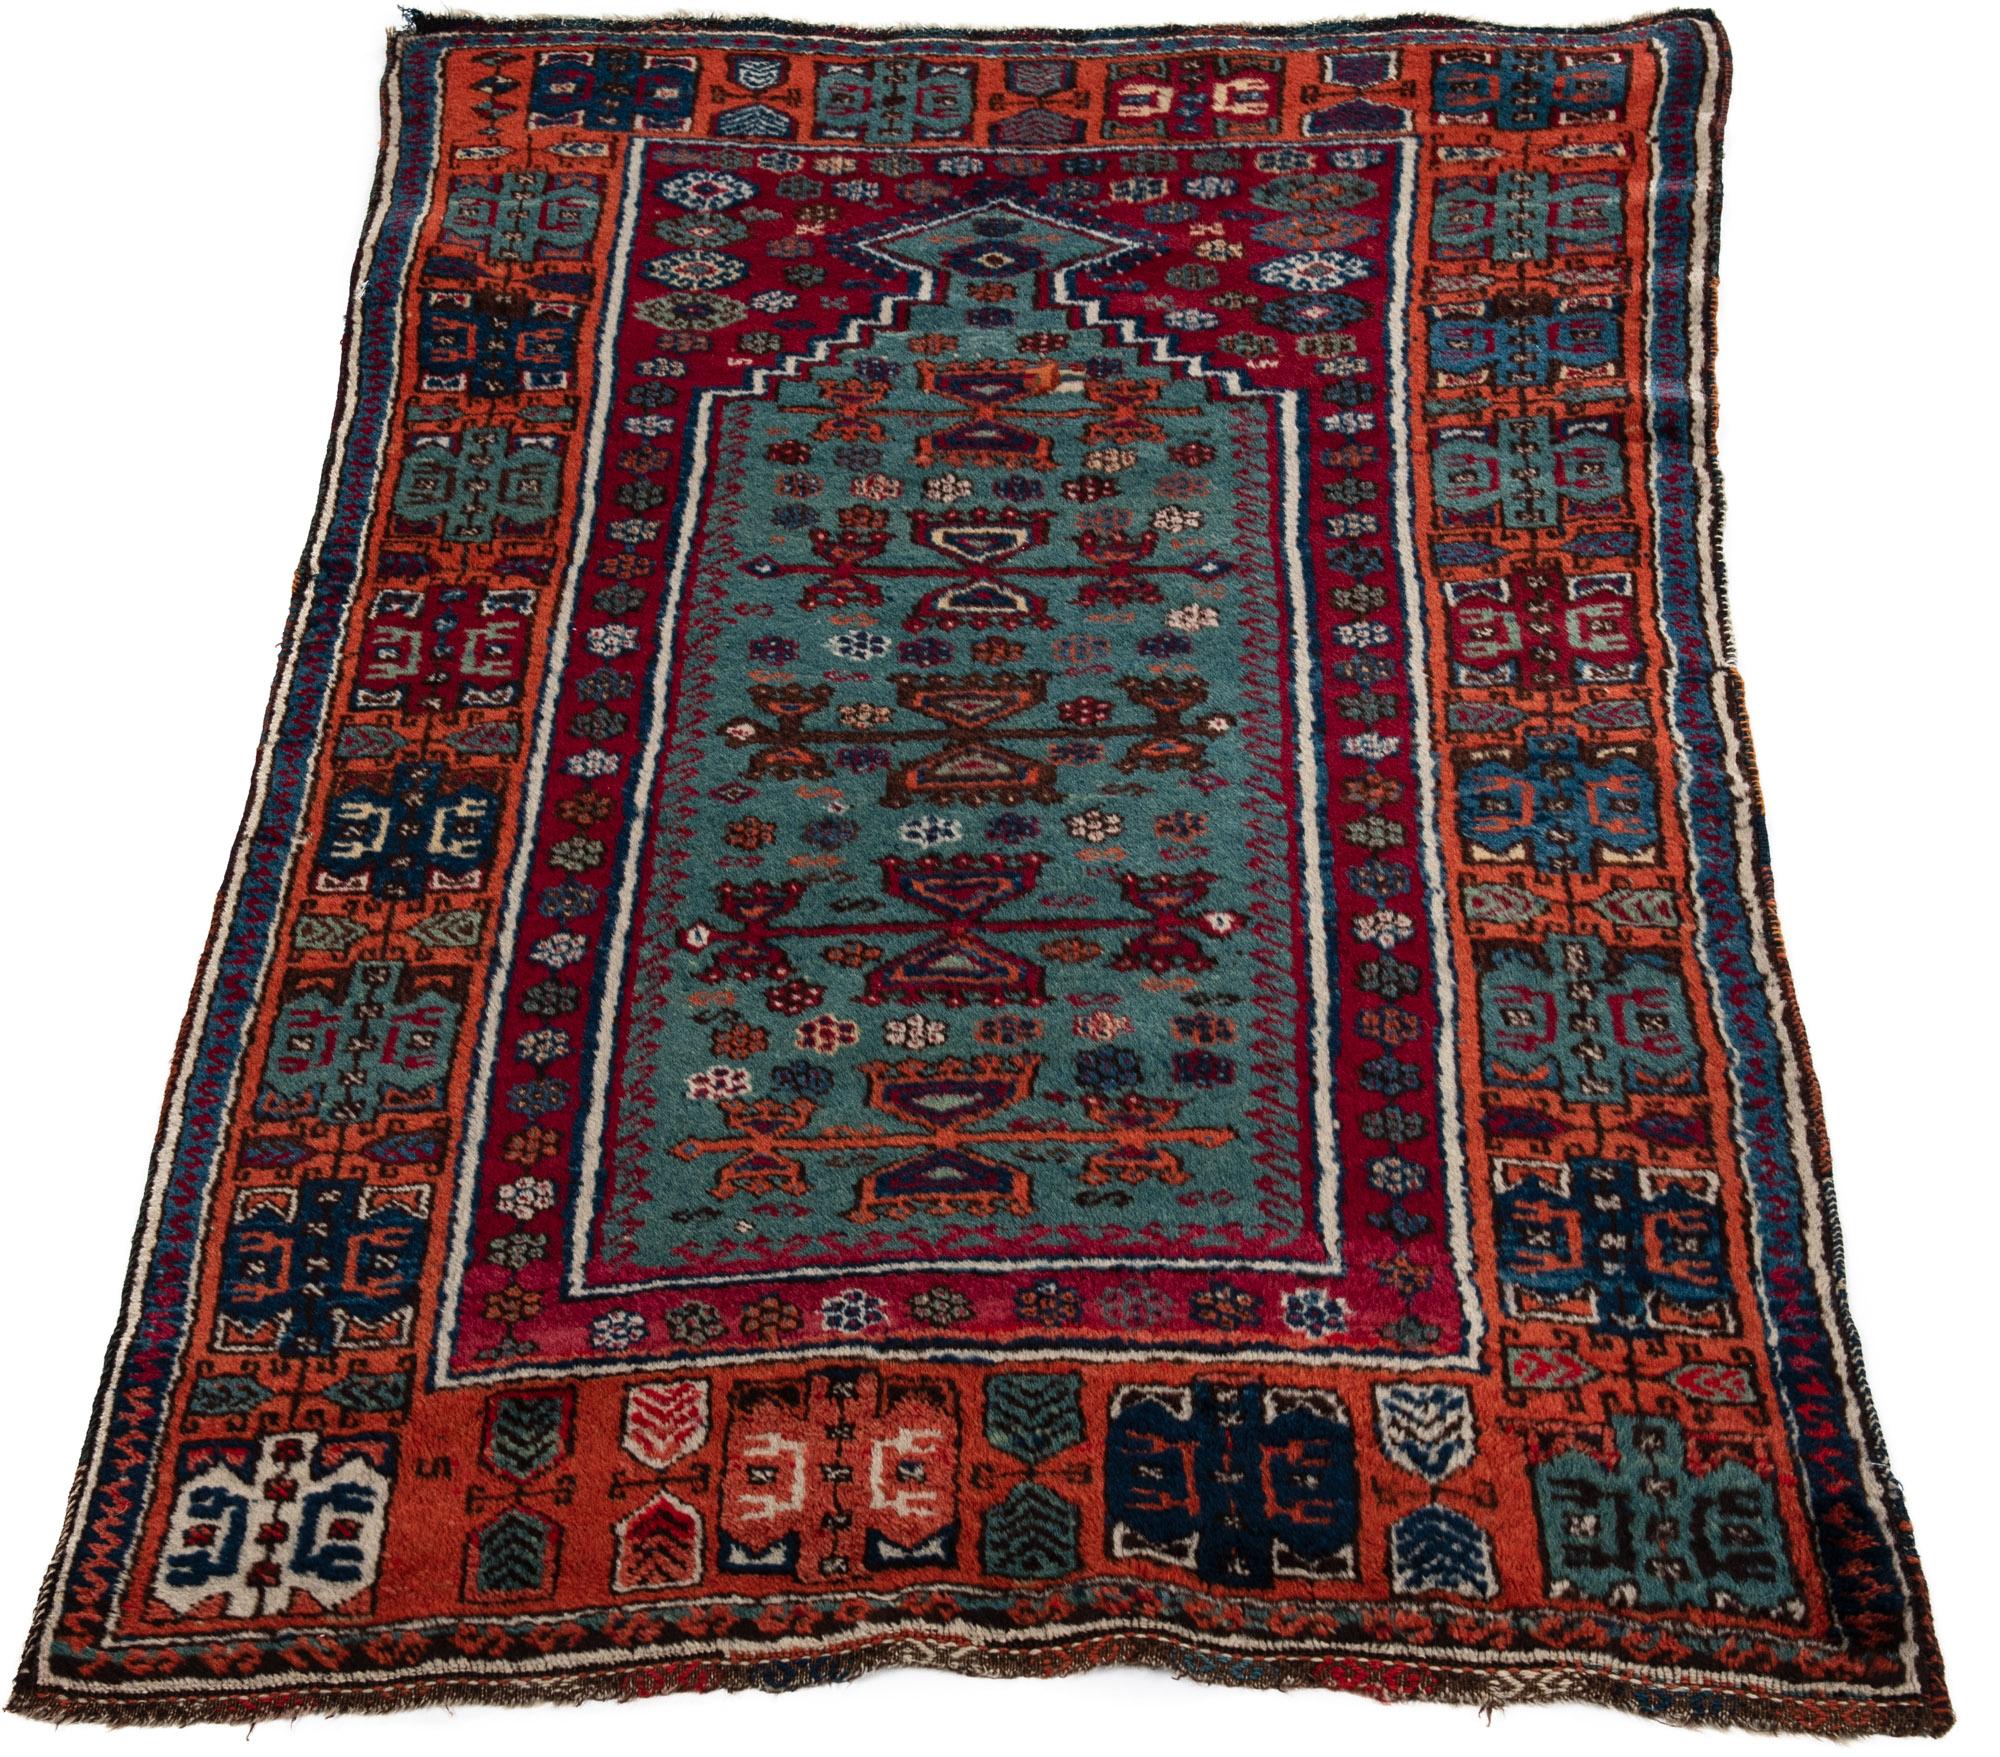 Antique Turkish Tribal Prayer Rug Woven in South-Eastern Anatolia Blue and Red In Good Condition For Sale In Evanston, IL